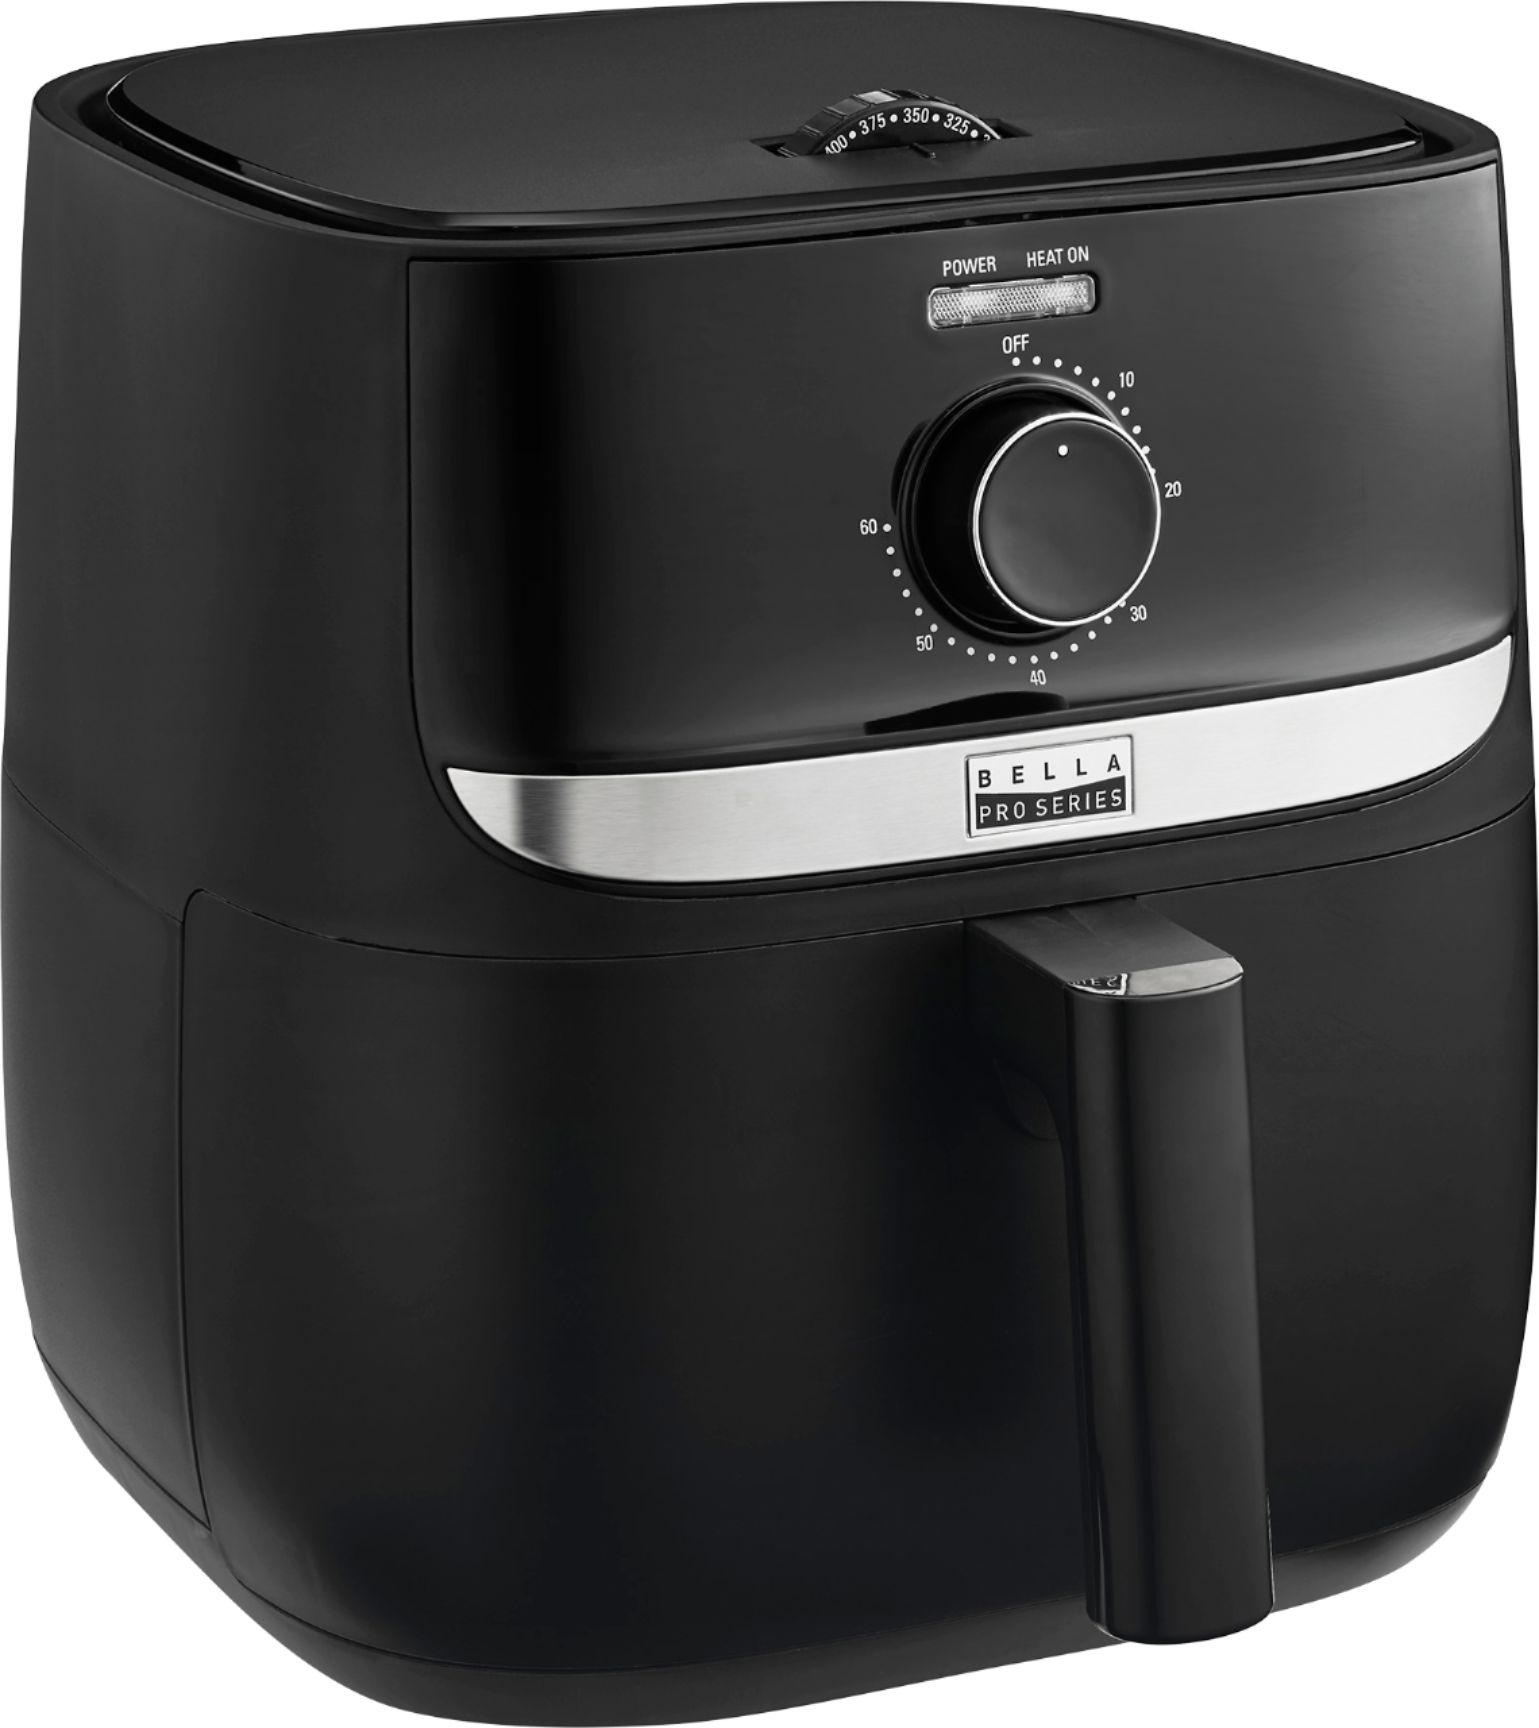 This Bella Pro Series air fryer is 50% off from Best Buy